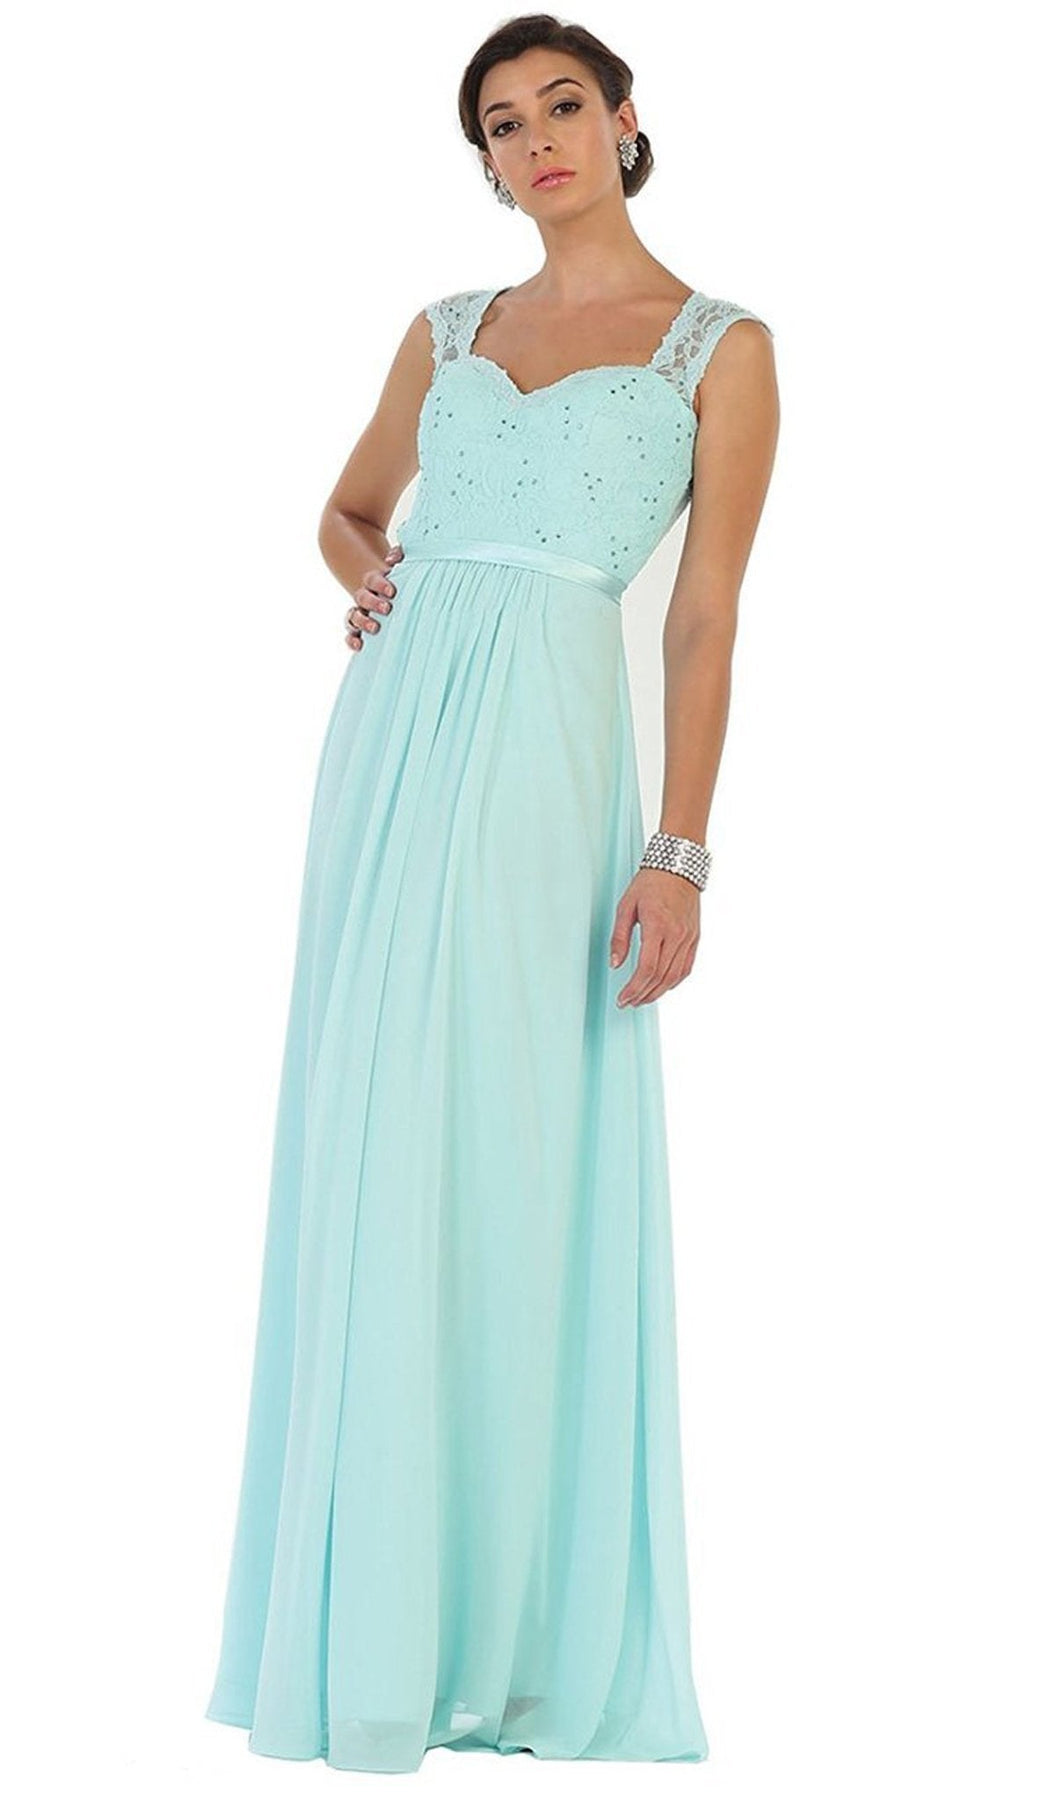 May Queen - Stunning Embellished Sweetheart Neck Chiffon A-Line Evening Dress Special Occasion Dress 4 / Aqua